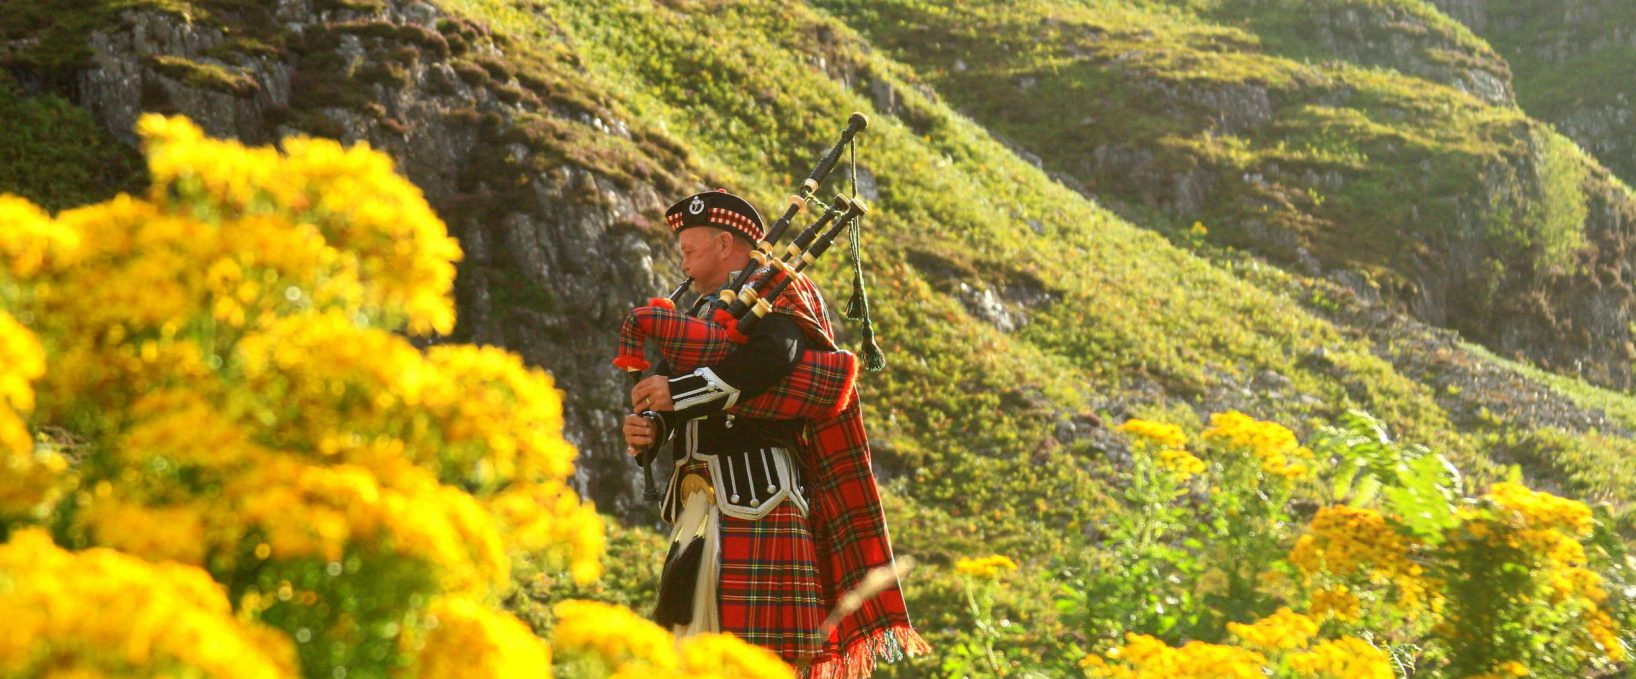 Man with bagpipes